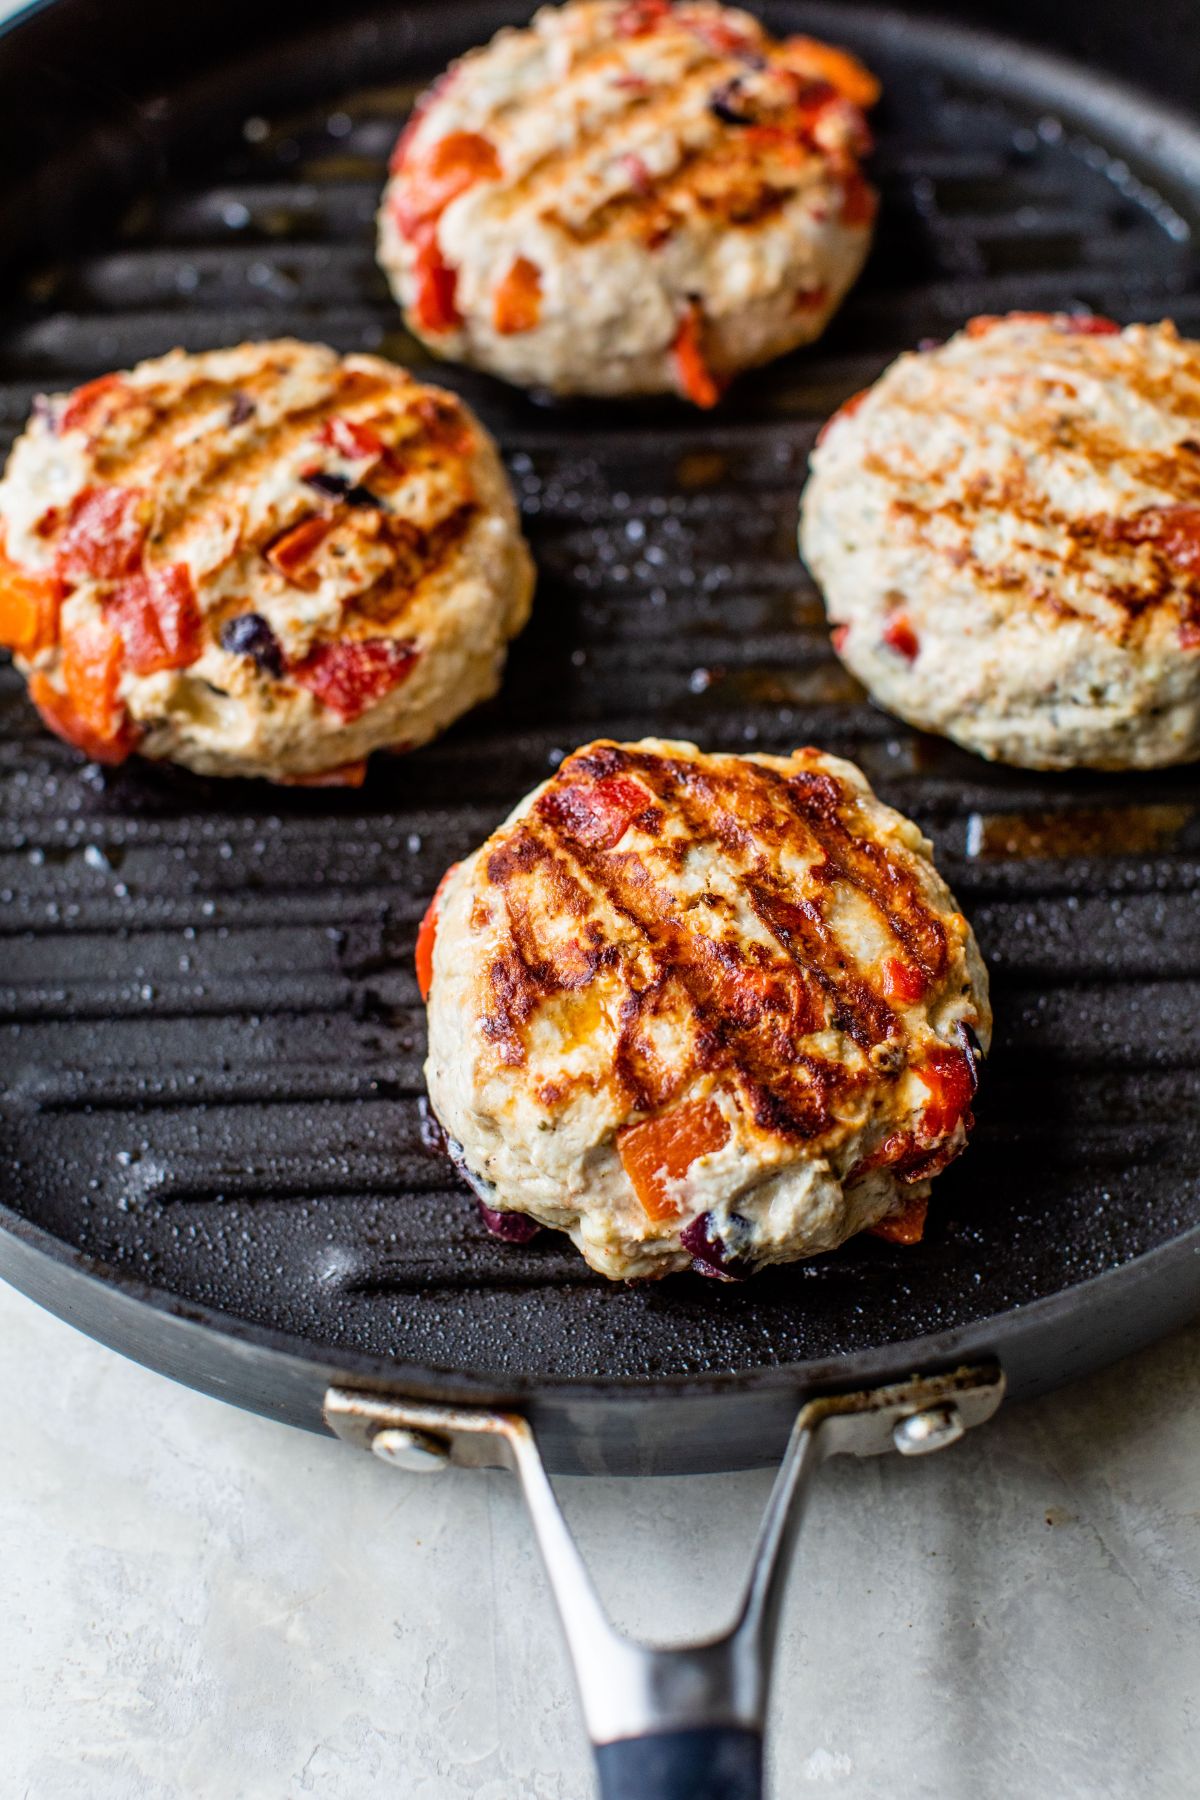 Turkey burgers cooking on a grill pan.